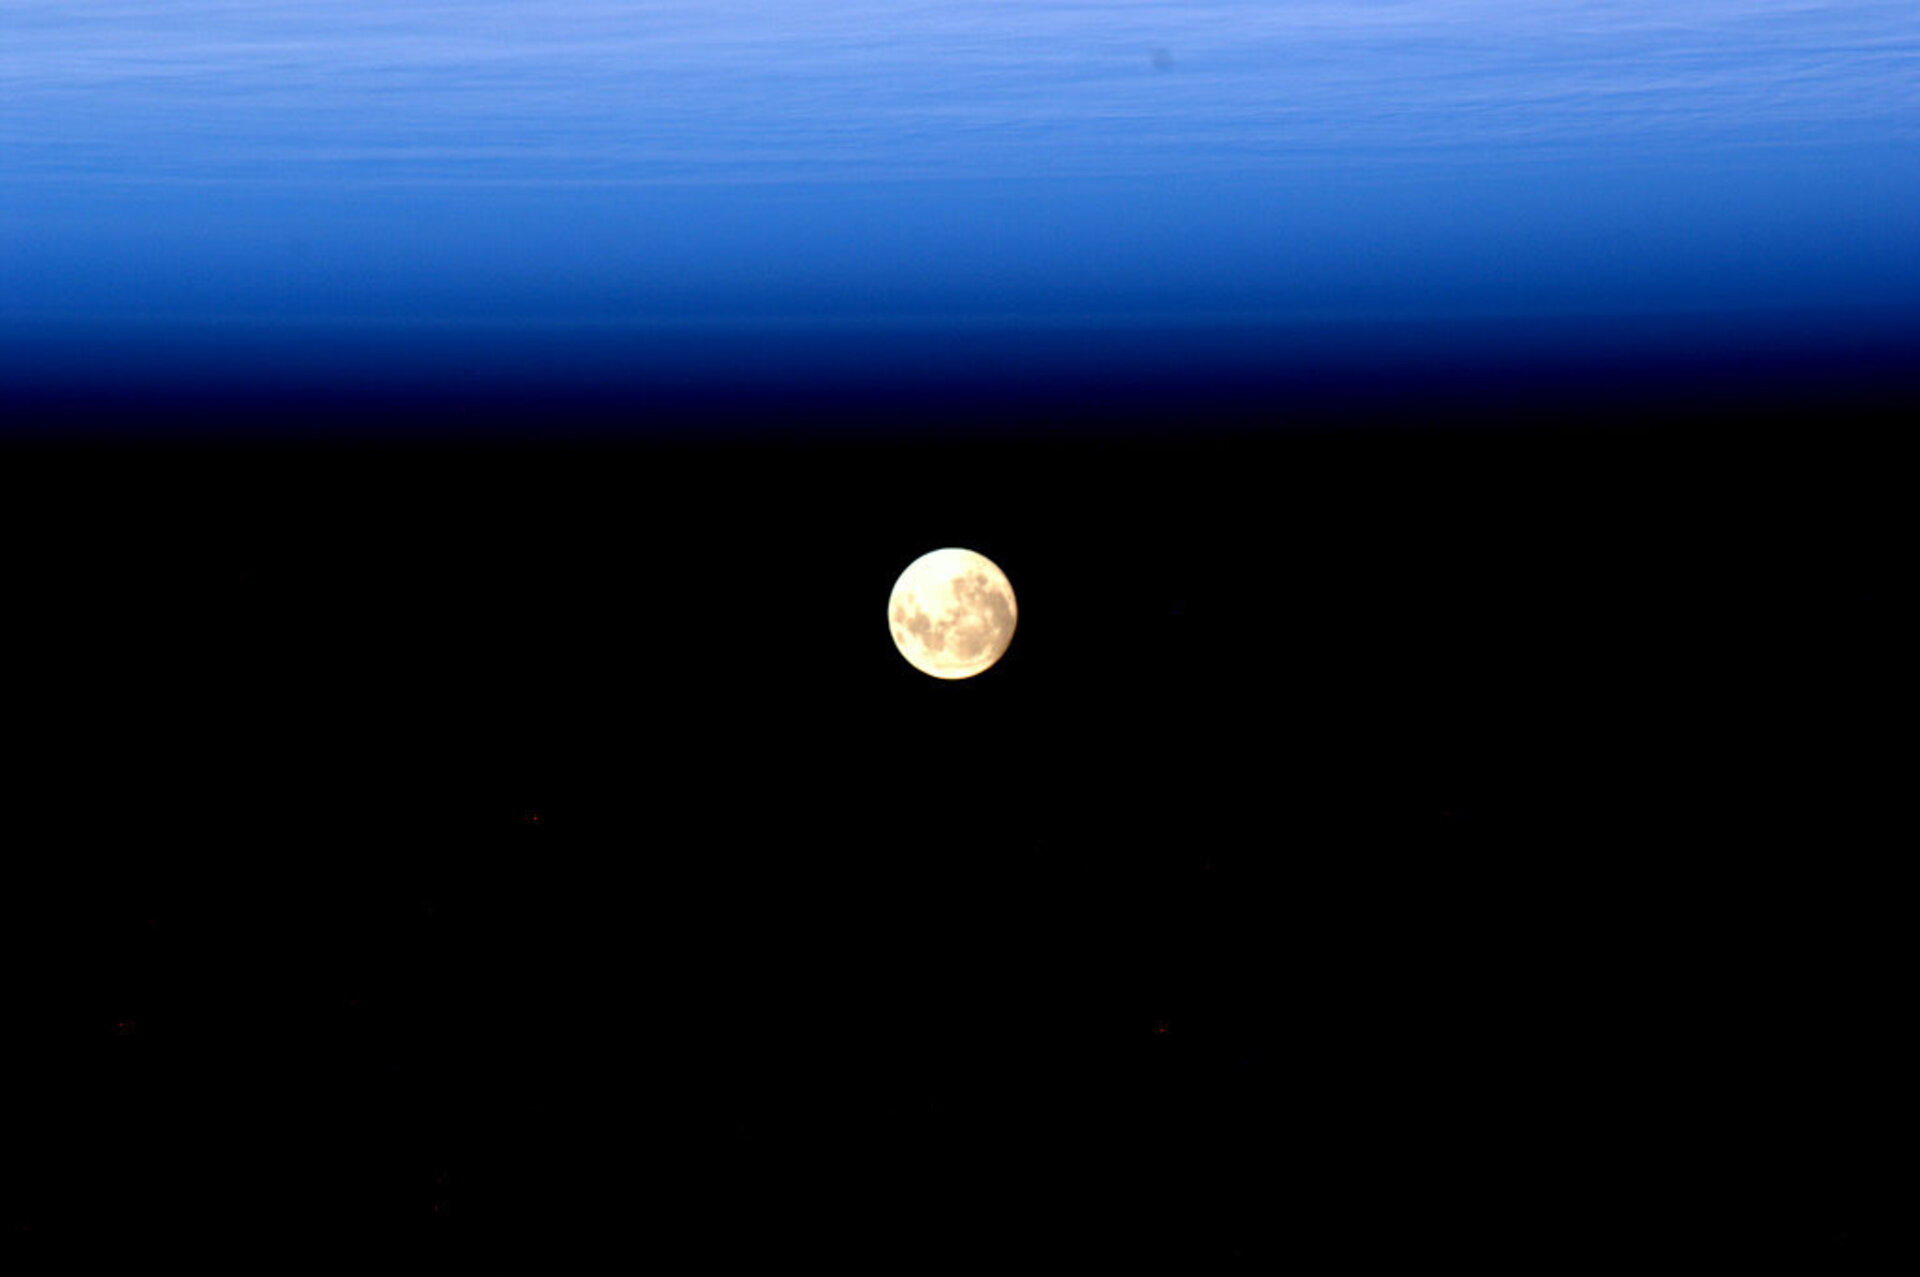 The moon, as seen by Andre Kuipers onboard the ISS